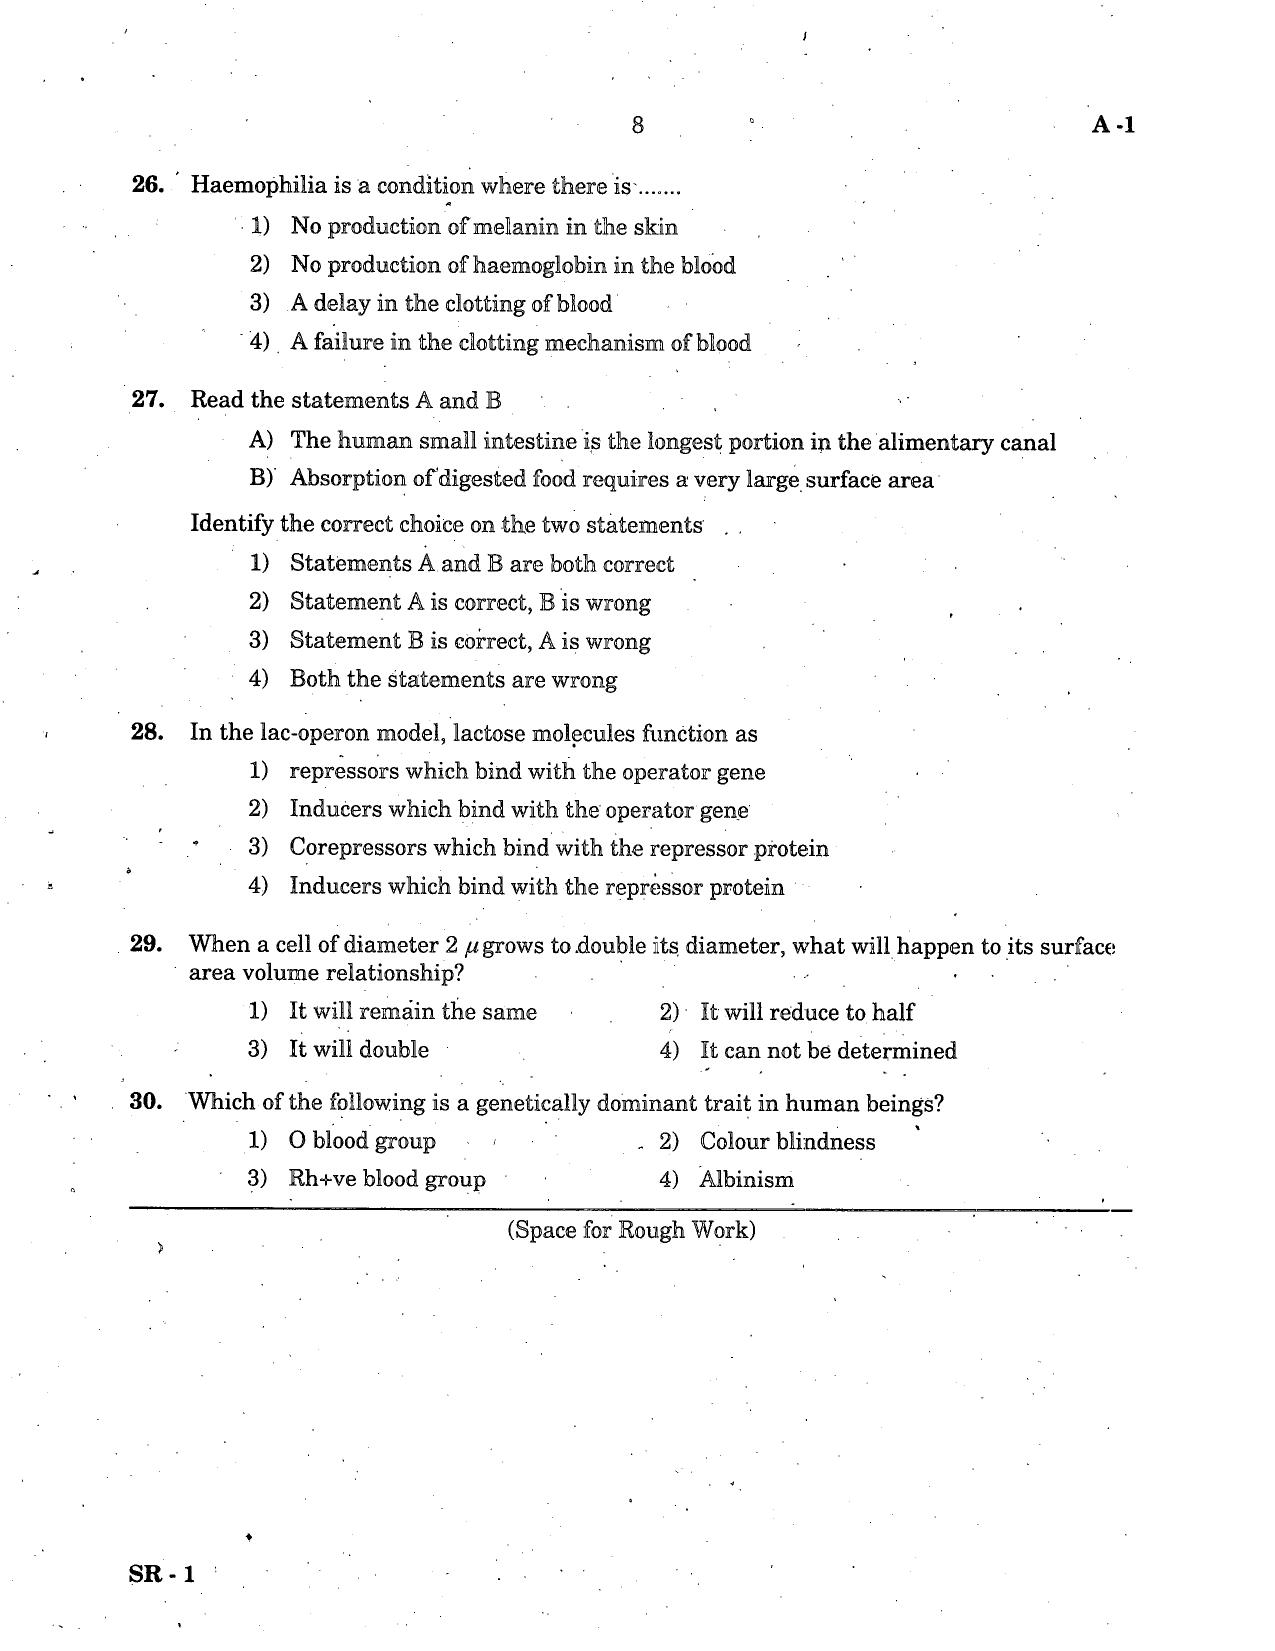 KCET Biology 2005 Question Papers - Page 8